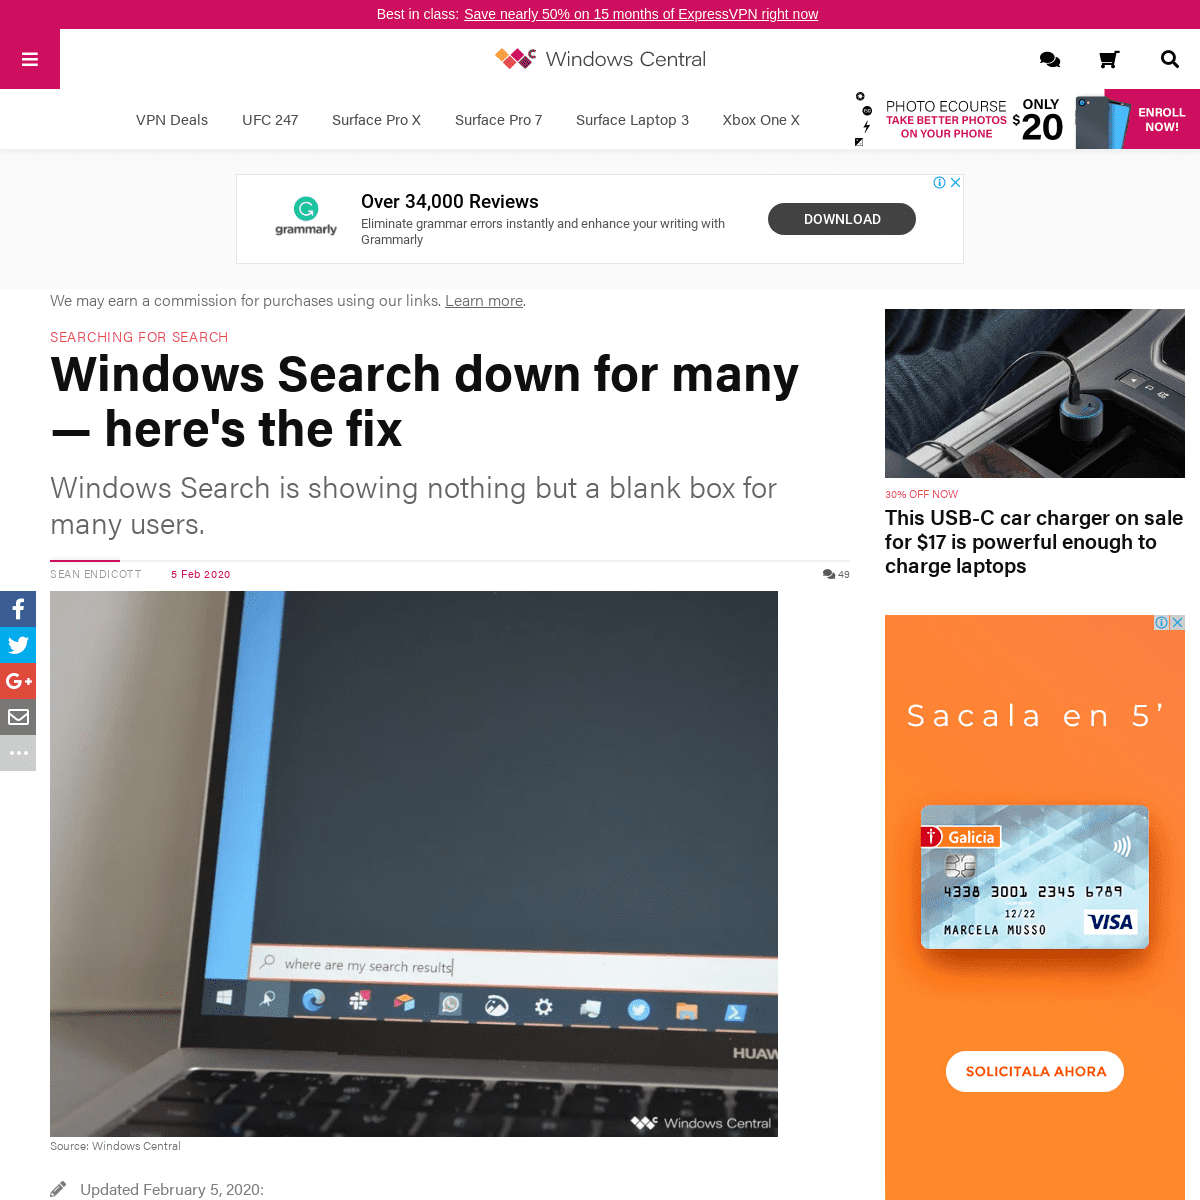 A complete backup of www.windowscentral.com/windows-search-down-many-showing-blank-box-instead-search-results